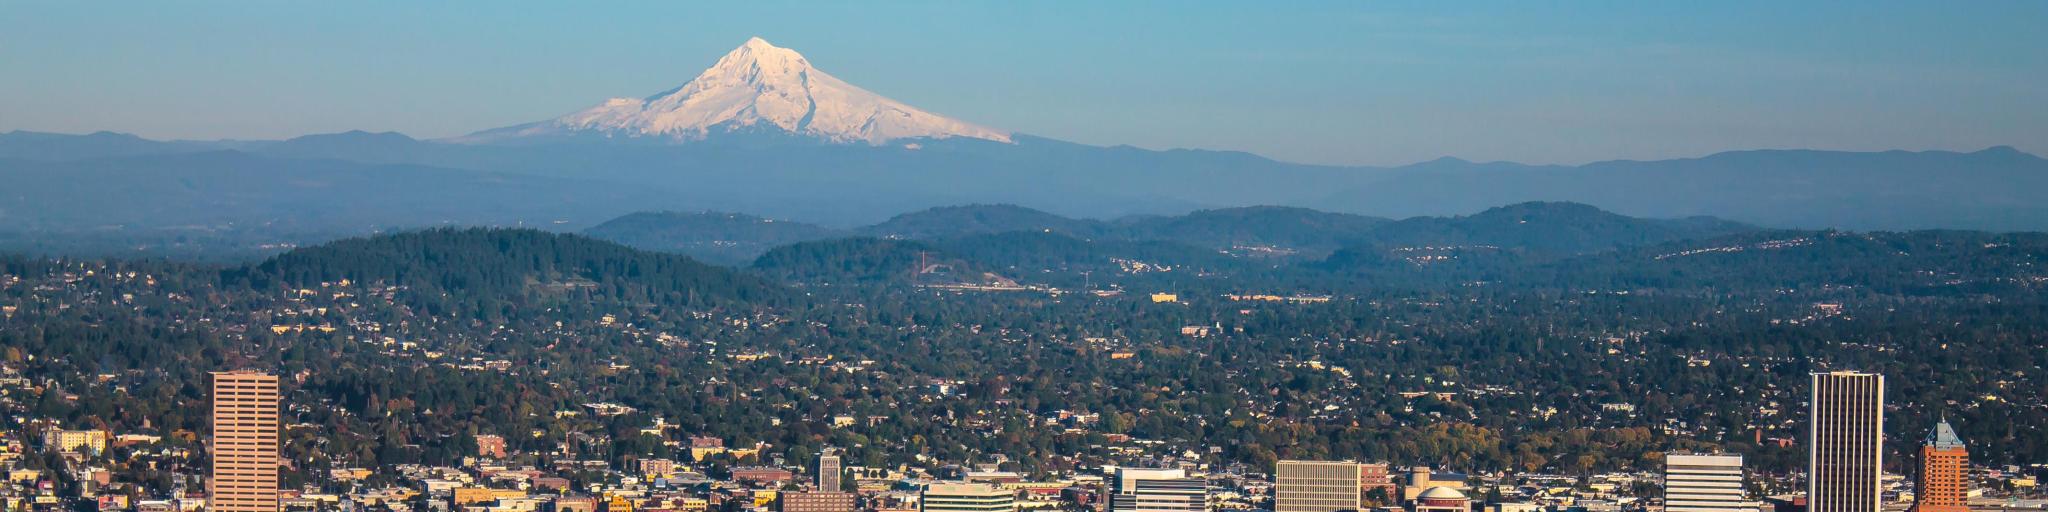 Cityscape of Portland, Oregon and Mount Hood towering in distance, autumn afternoon.